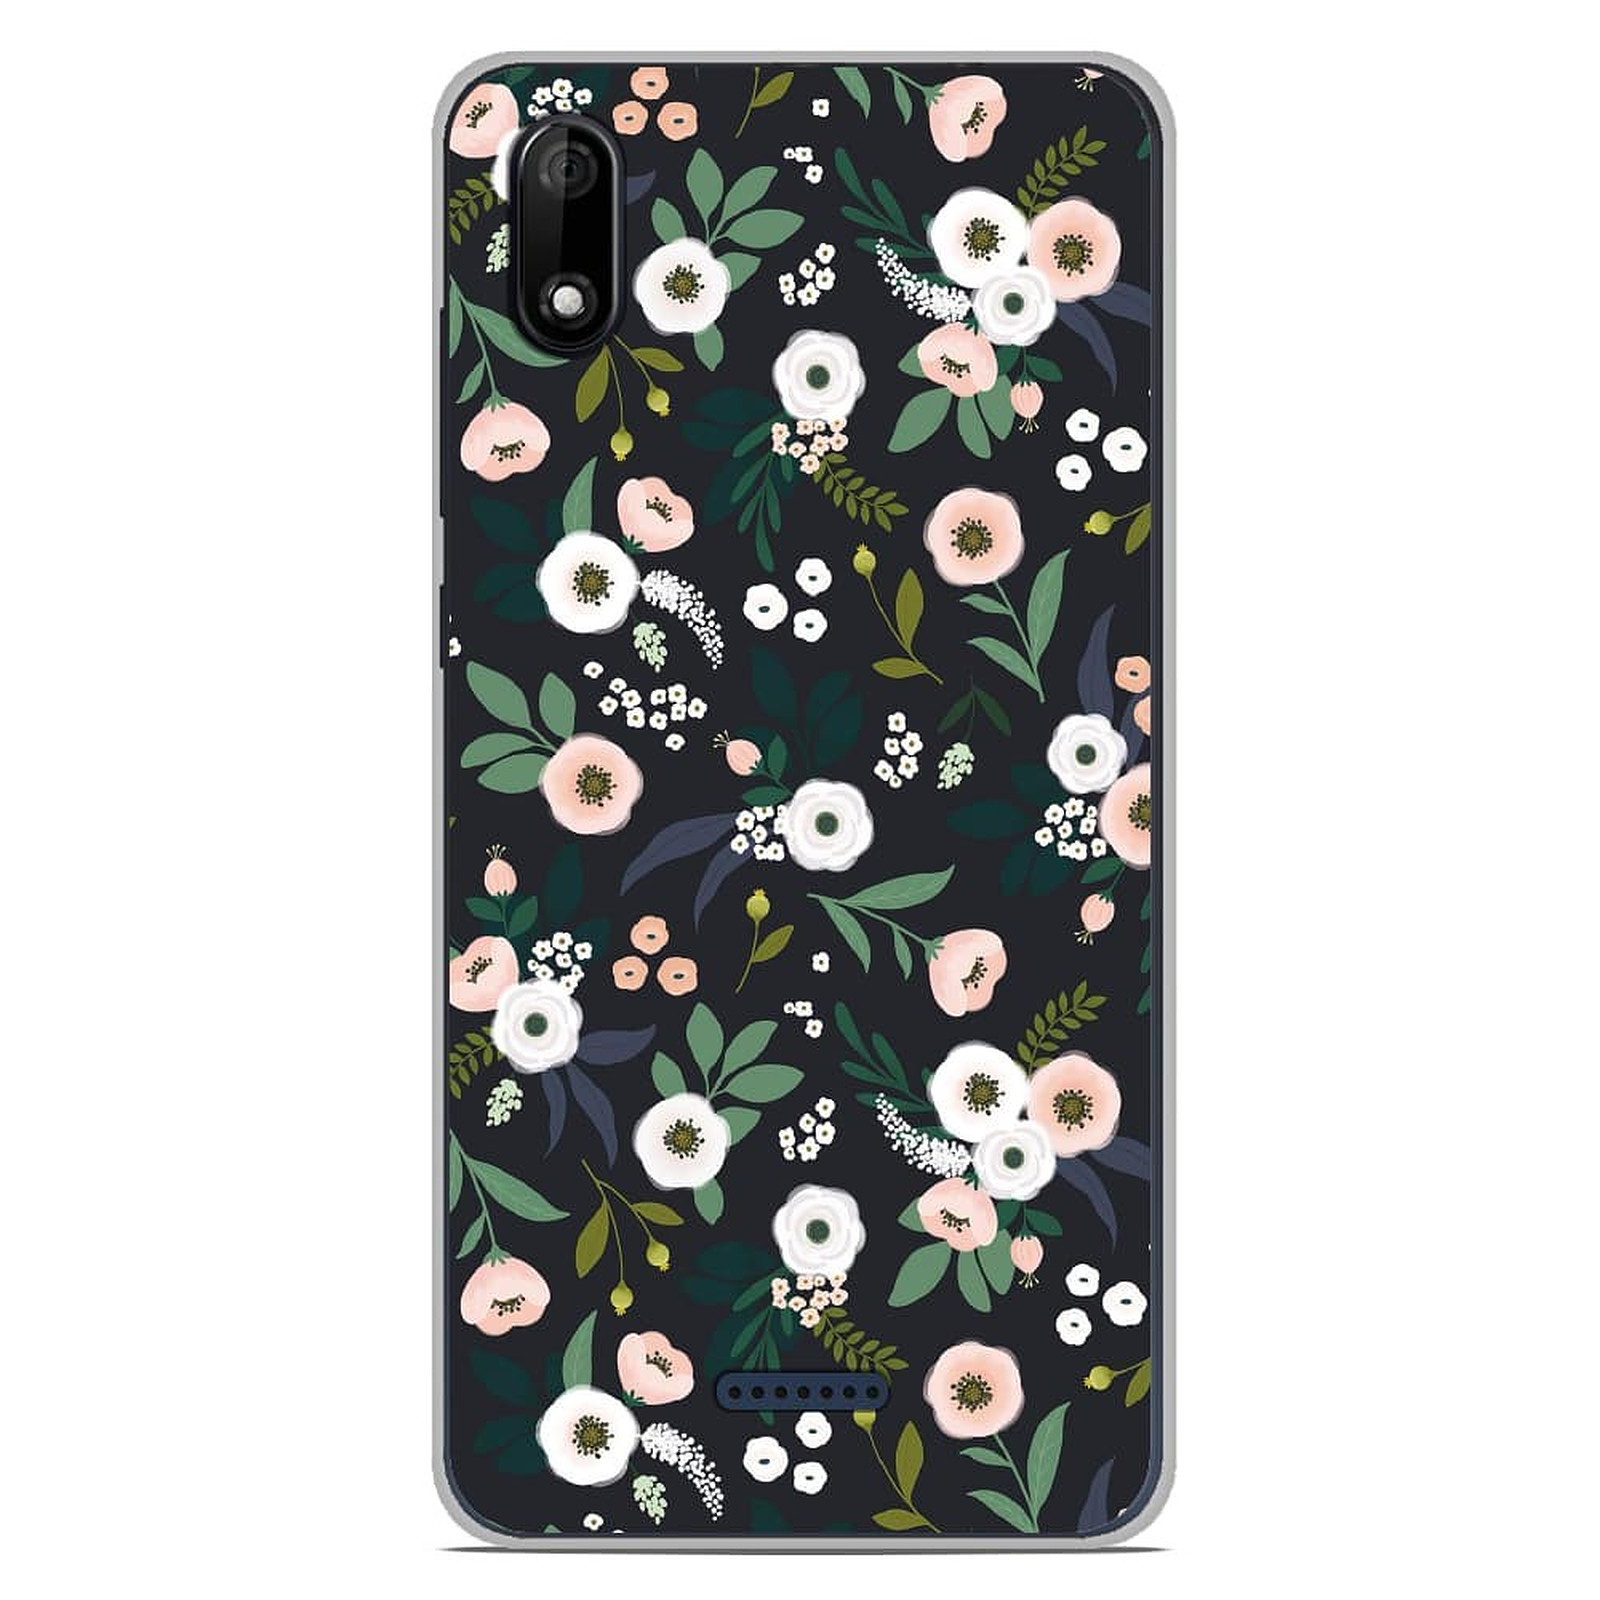 1001 Coques Coque silicone gel Wiko Y50 motif Flowers Noir - Coque telephone 1001Coques